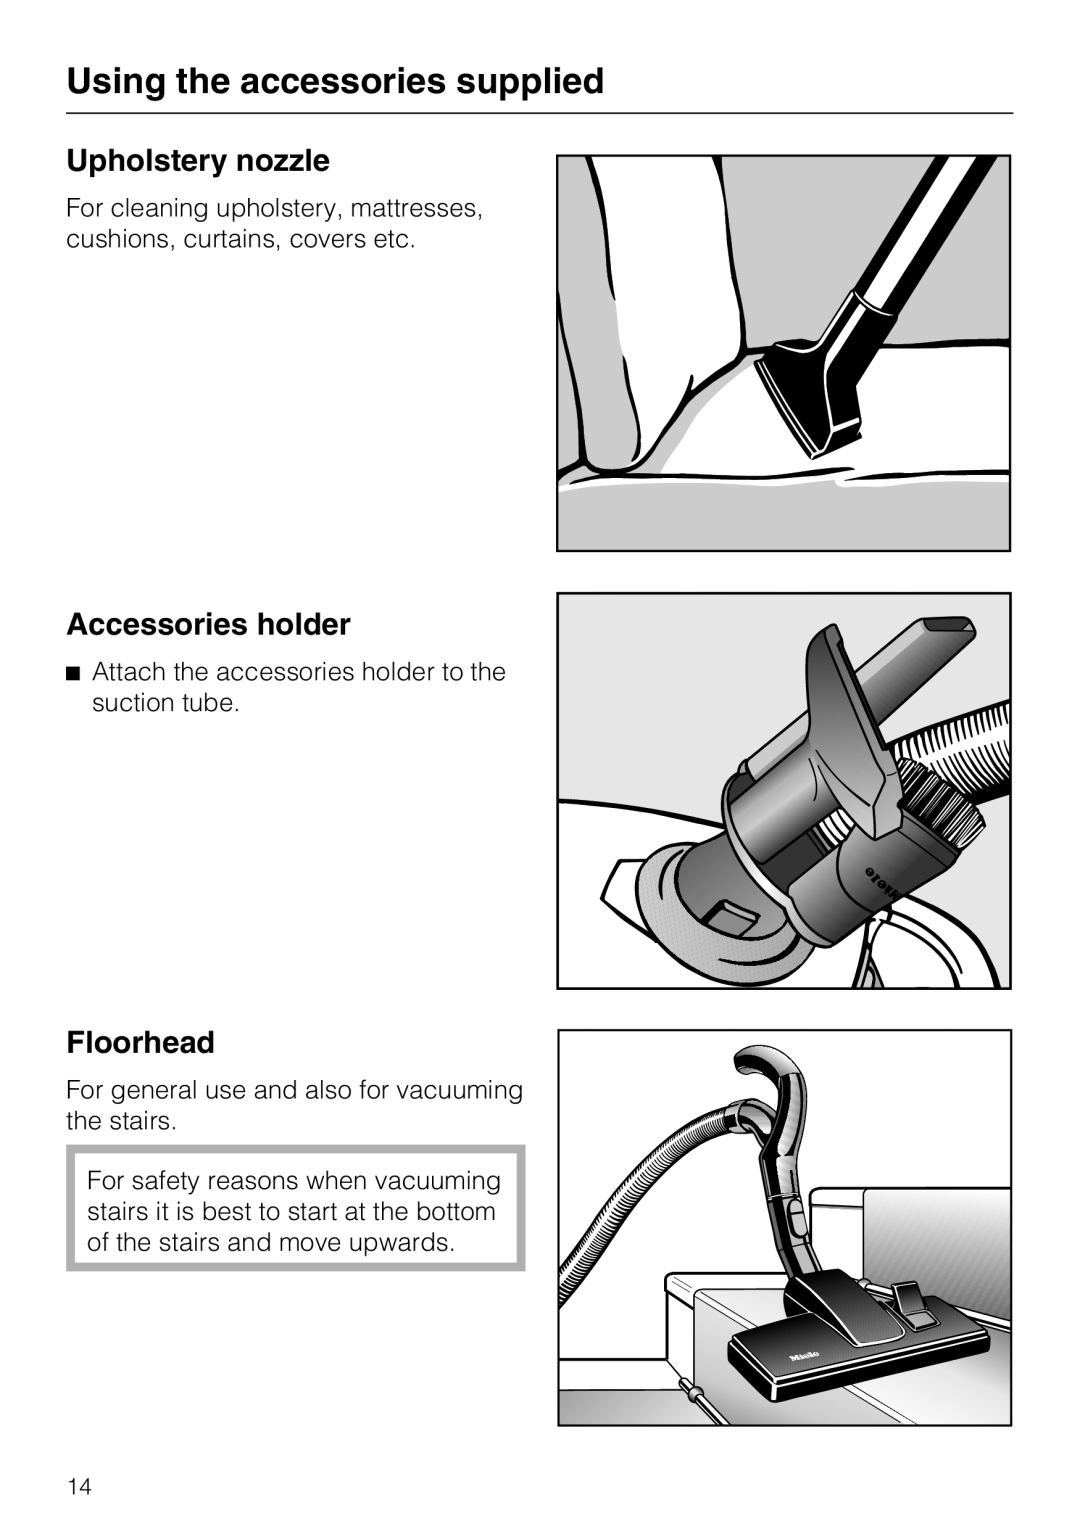 Miele S4212 manual Upholstery nozzle, Accessories holder, Floorhead, Using the accessories supplied 